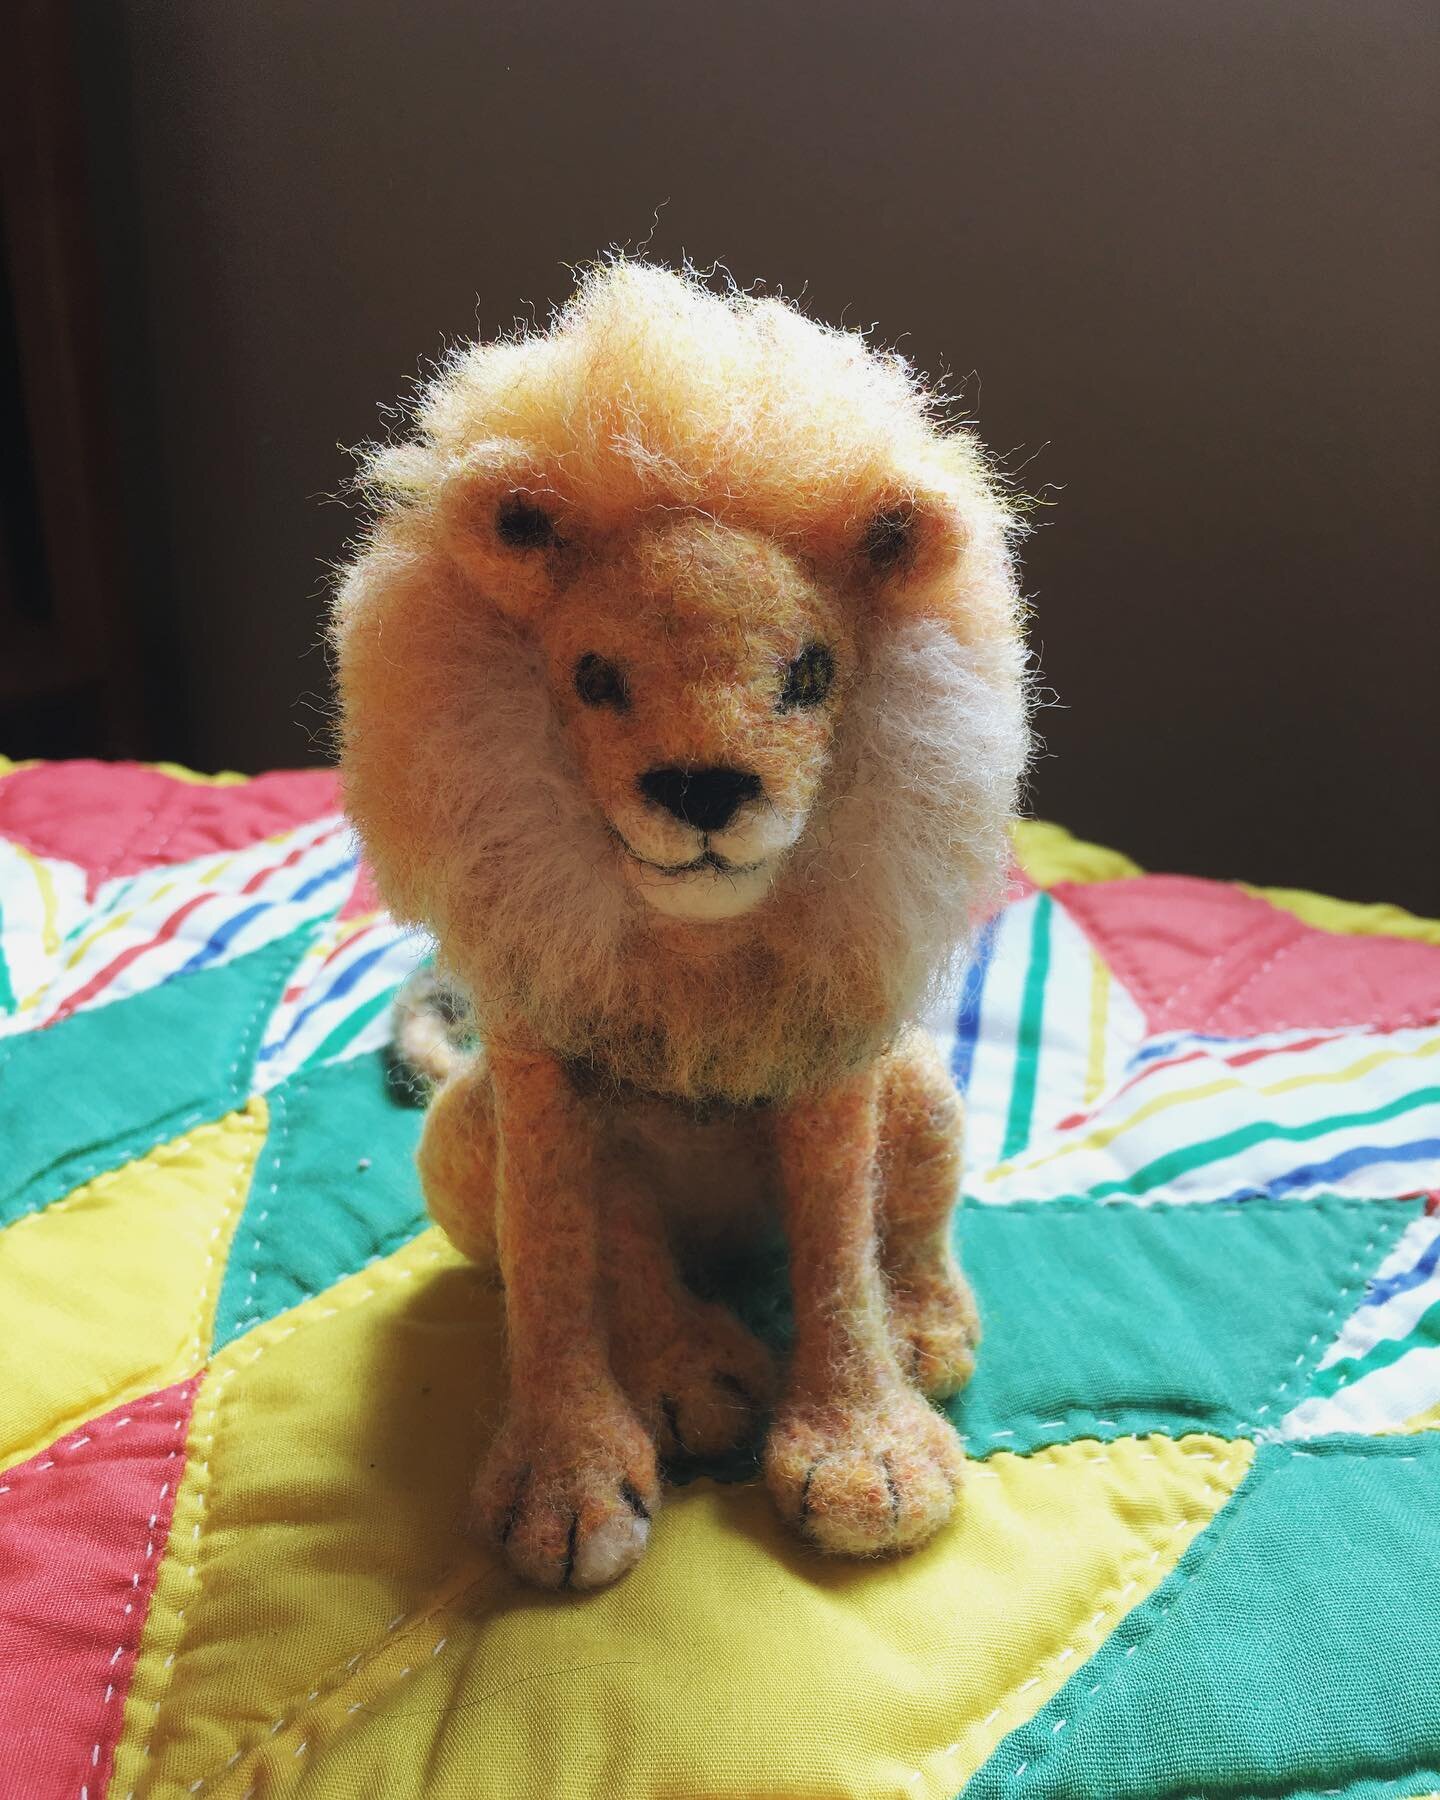 Trying to gradually share a huge backlog of photos... Here&rsquo;s a felted #lion I made for my dad last year! It was a fun challenge to figure out how to make him sit in a natural way, and to get his mane sufficiently fluffy.
&bull;
#needlefelting #